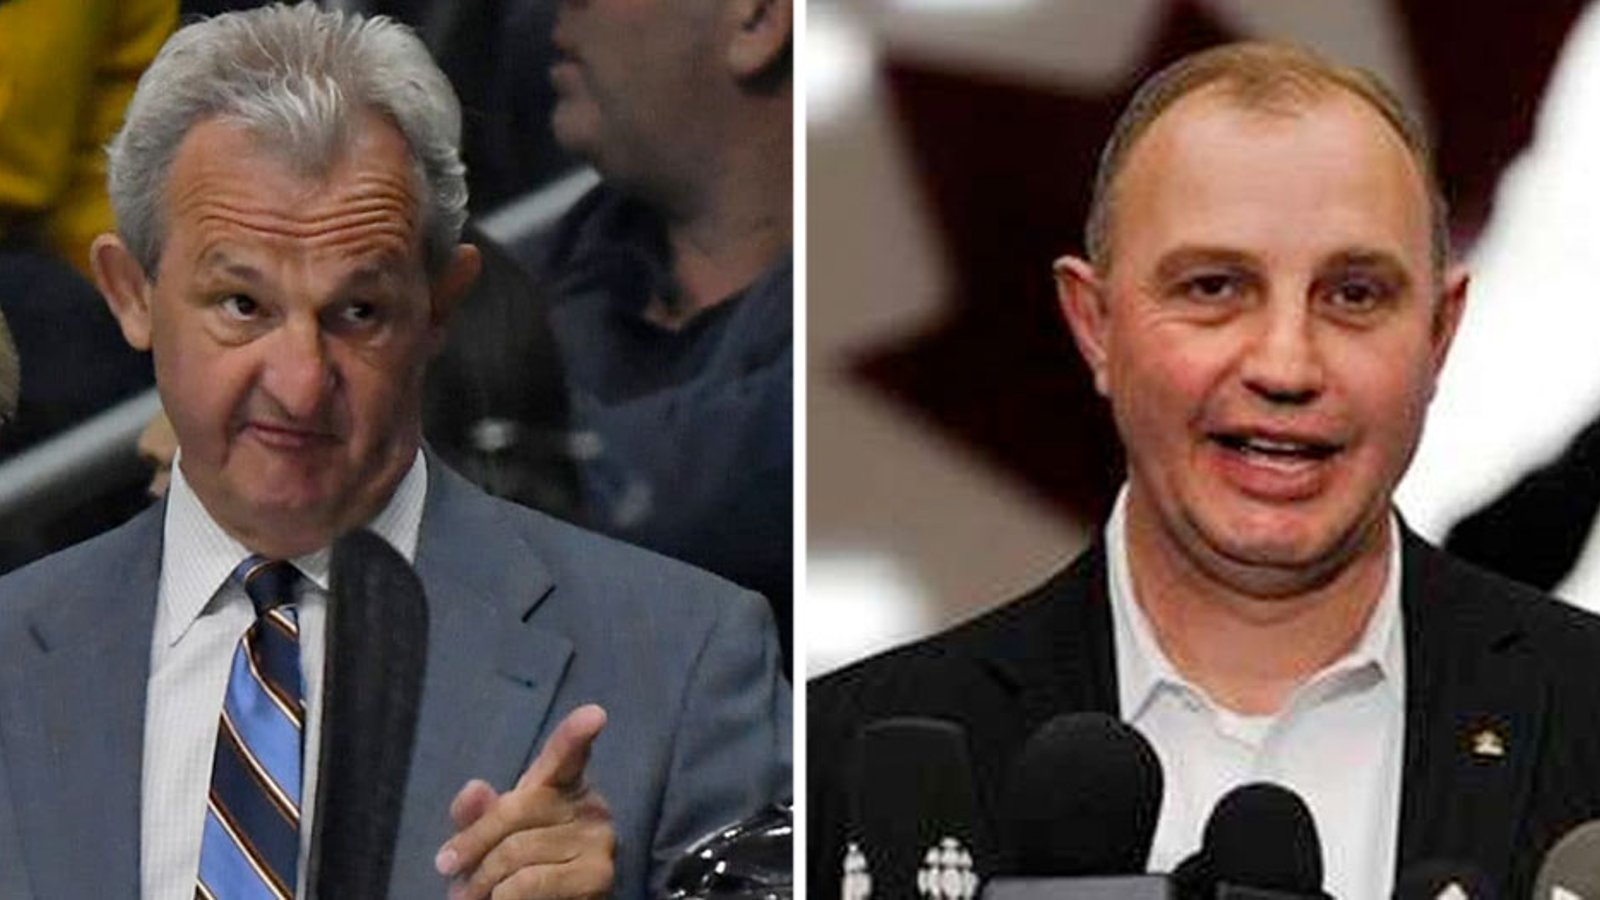 Hockey’s “Me Too” moment continues as stories about the Sutter brothers emerge